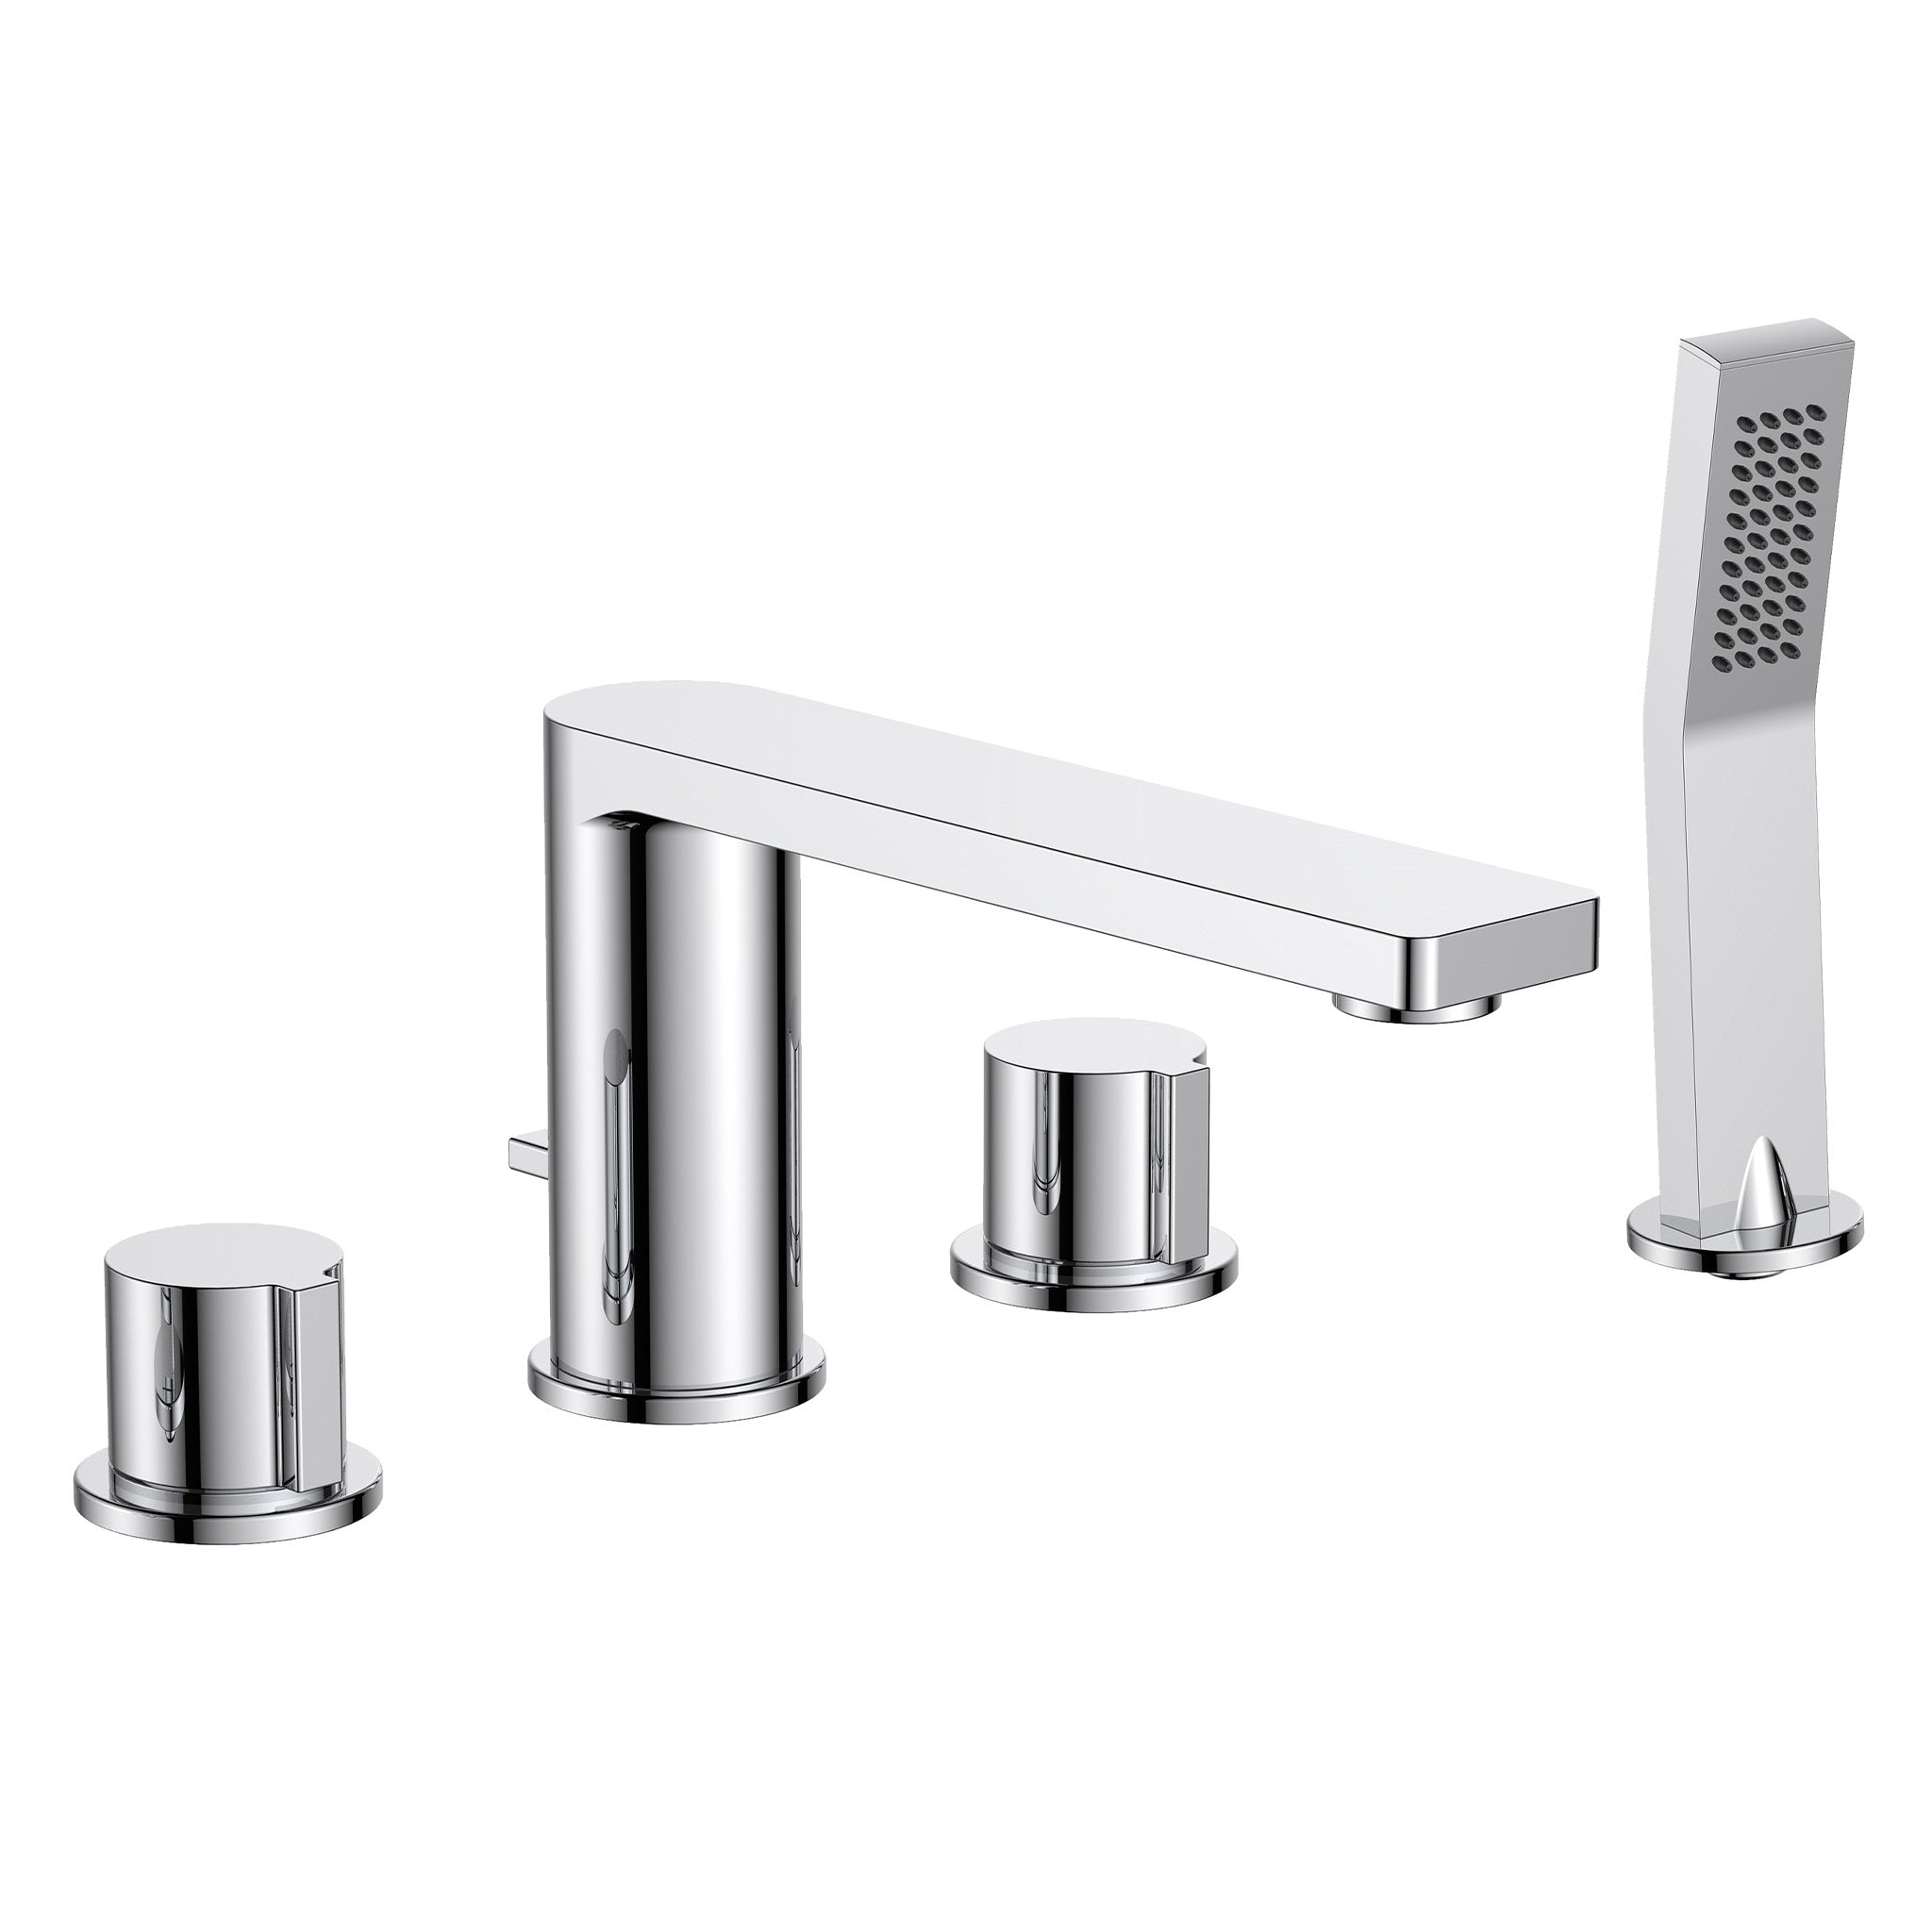 JTP Hugo 4 Hole Bath Shower Mixer Tap With Extractable Hand Shower